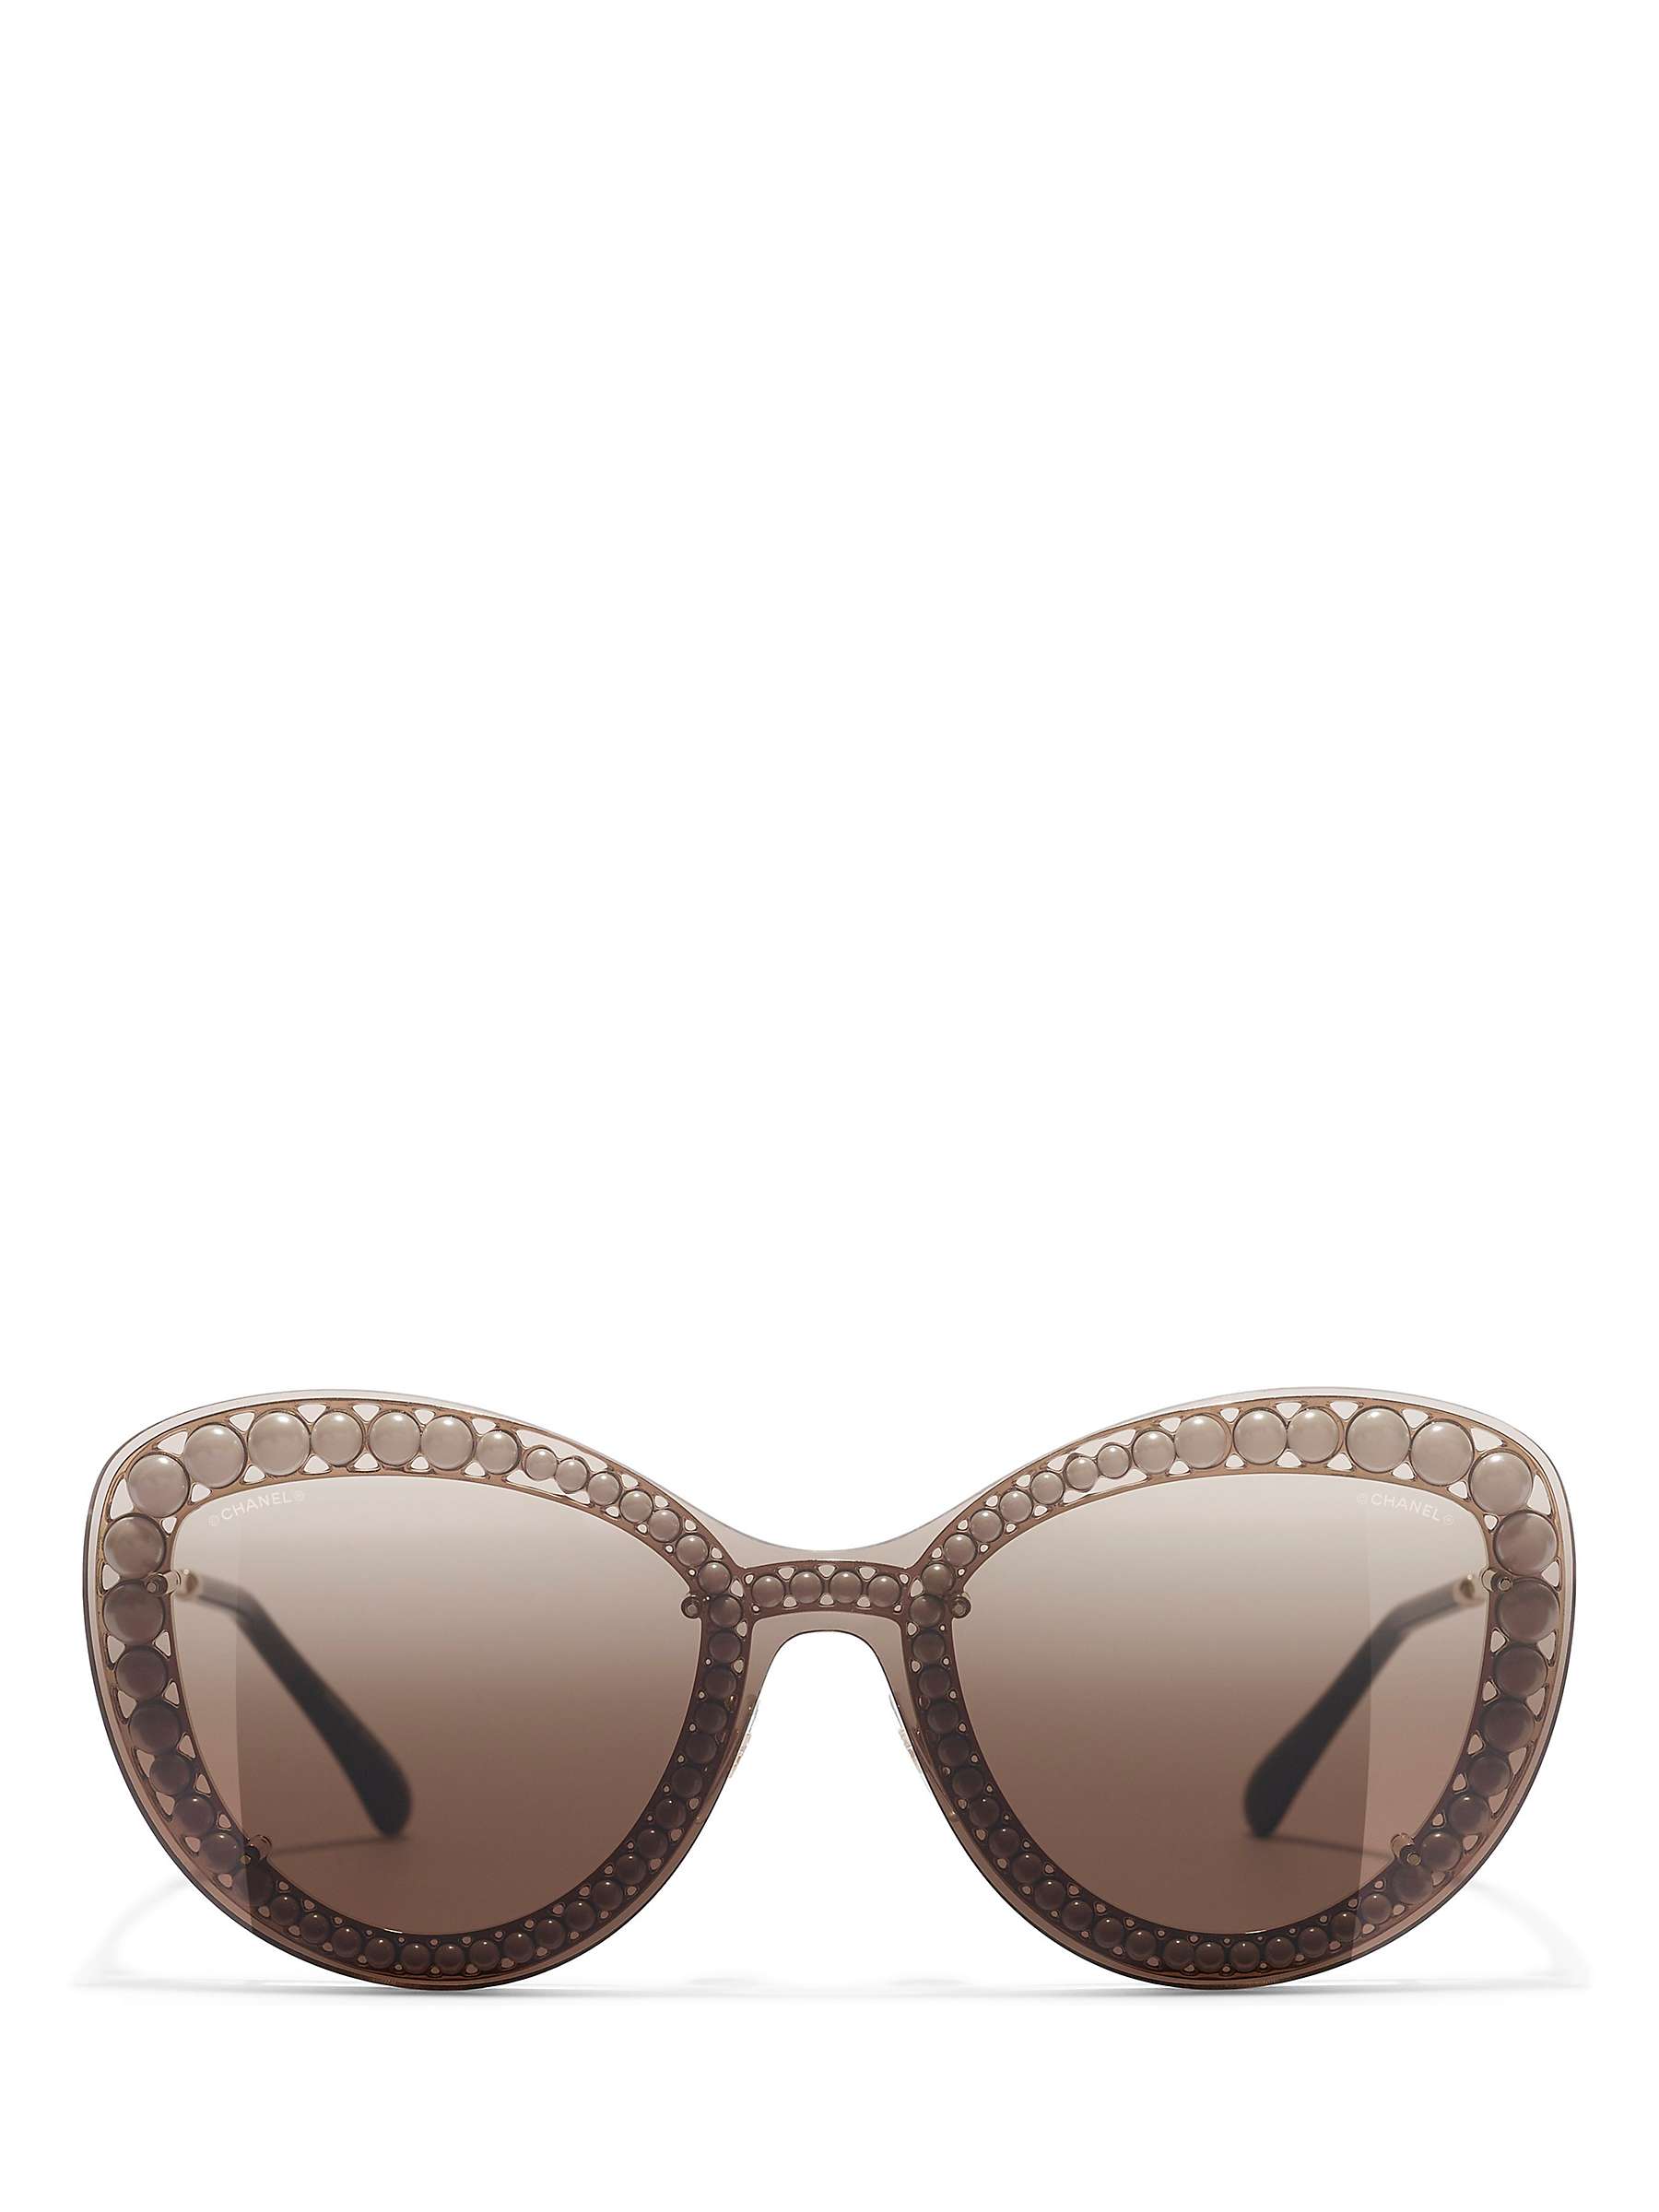 Buy CHANEL Butterfly Sunglasses CH4236 Gold/Brown Gradient Online at johnlewis.com